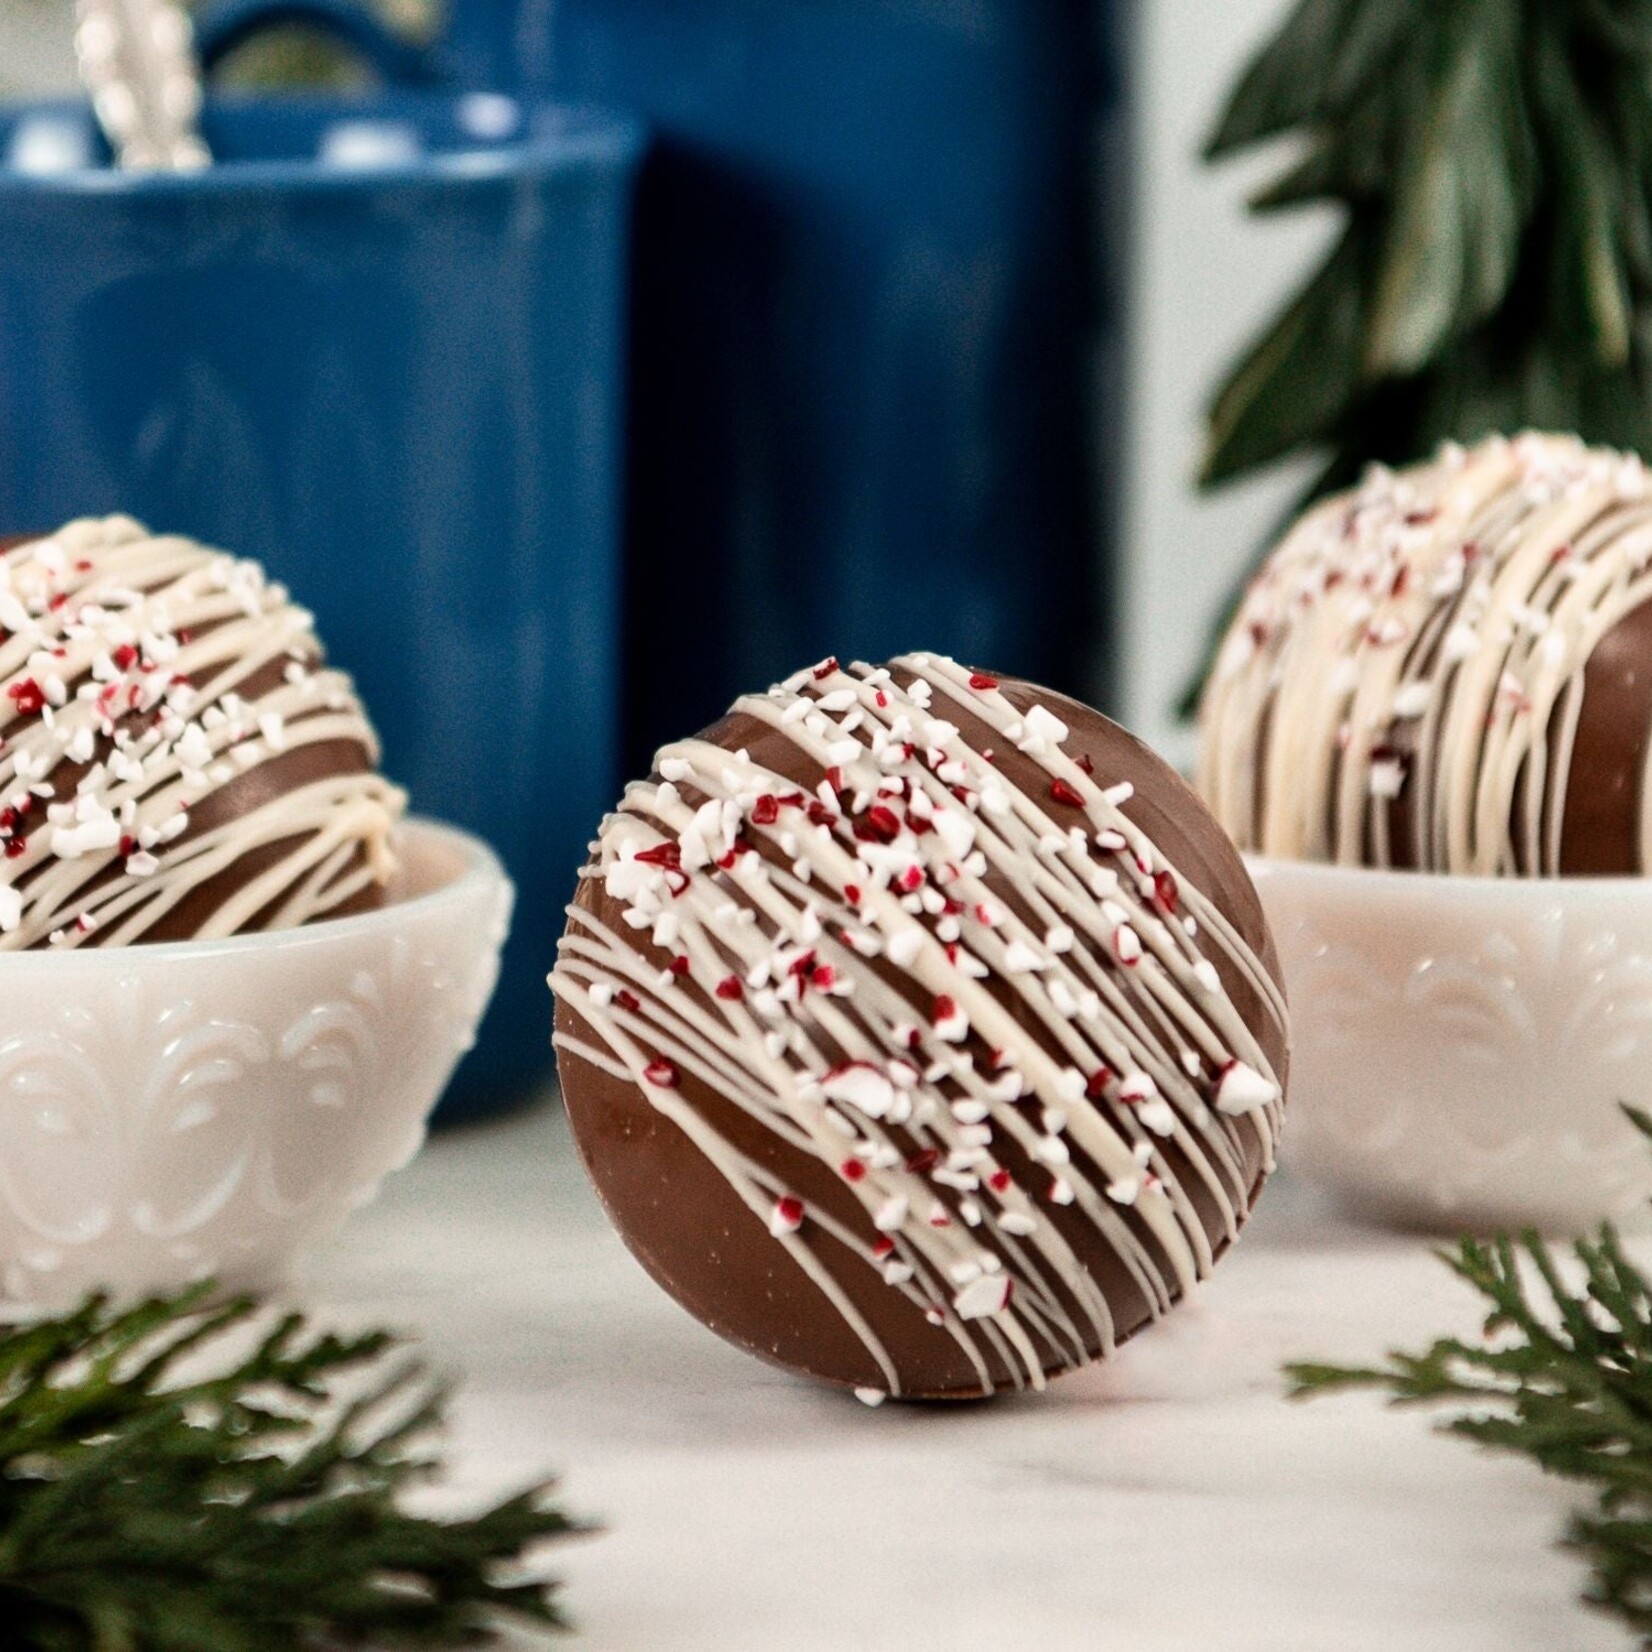 Ticket Chocolate - Hot Chococlate Bomb 2 pack - Peppermint w/peppermint Marshmellow